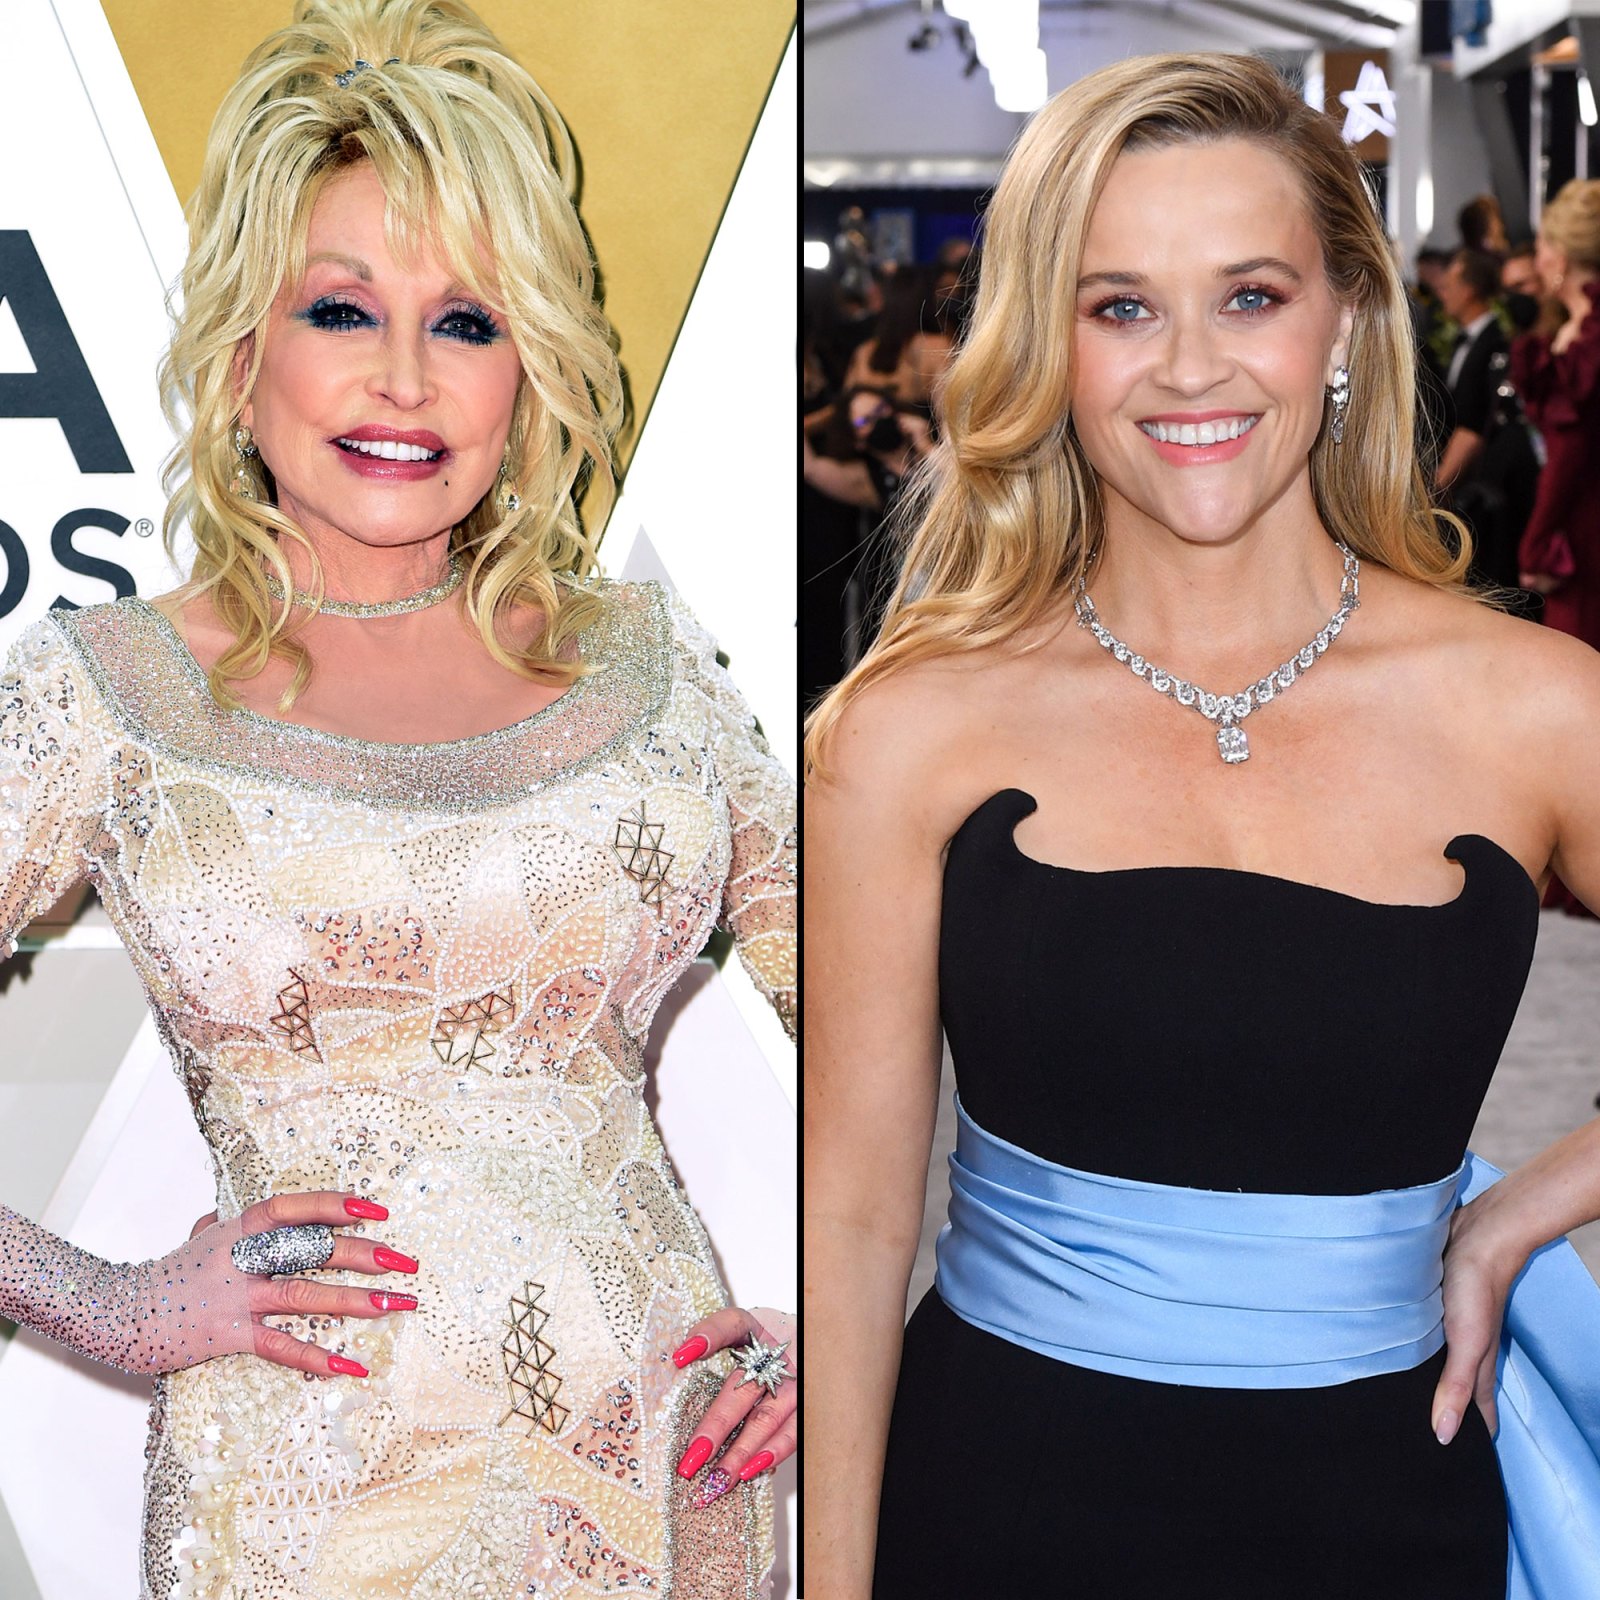 Dolly Parton and Reese Witherspoon Celebrities Reveal Which Stars They Want to Play Them Onscreen in a Biopic